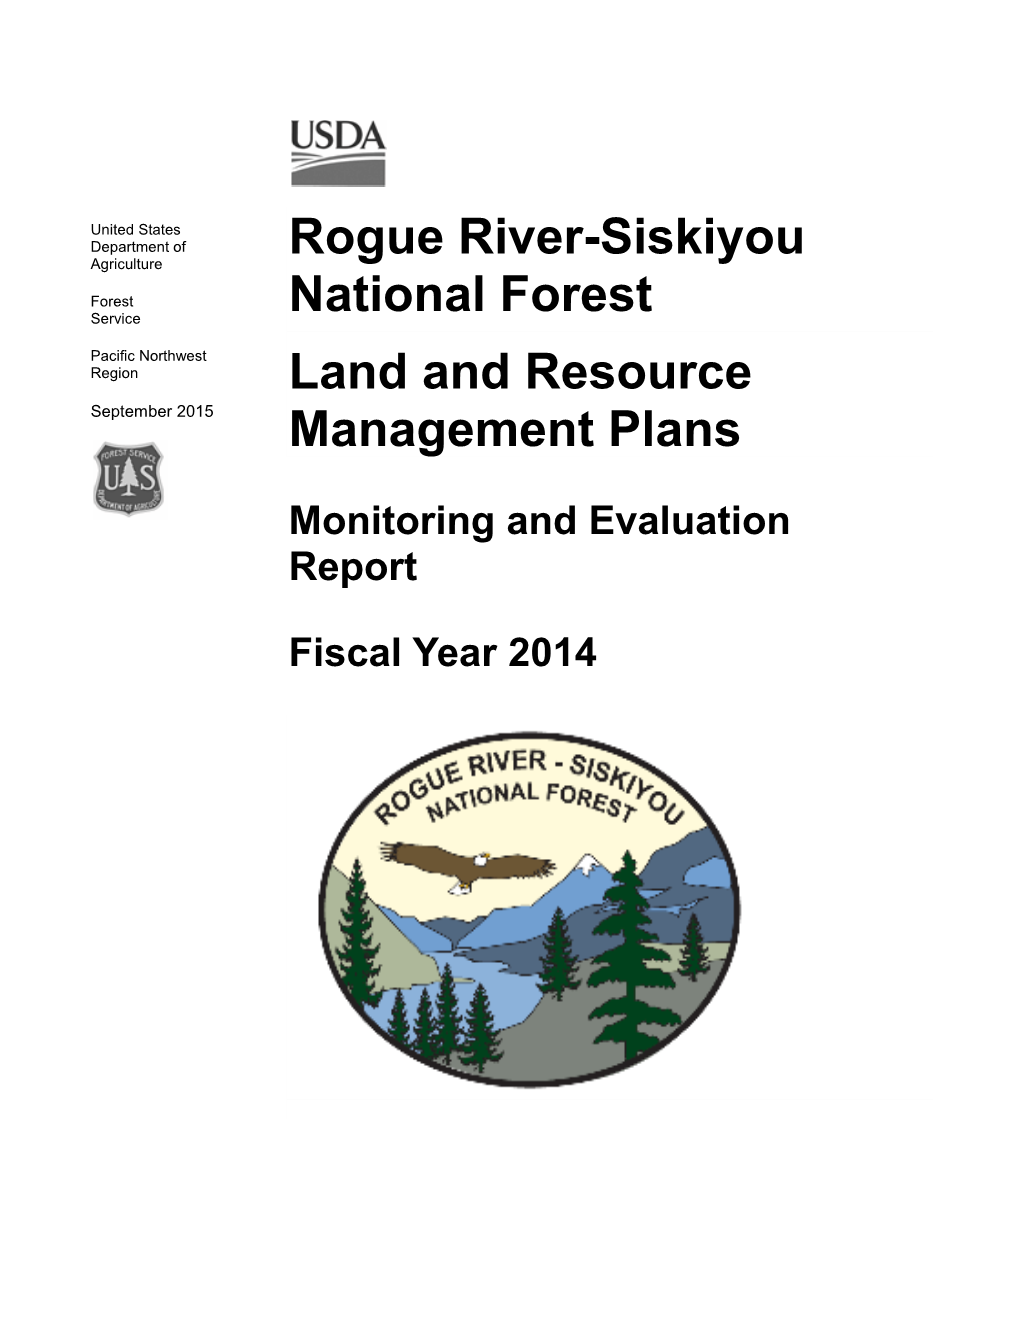 Rogue River-Siskiyou National Forest Land and Resource Management